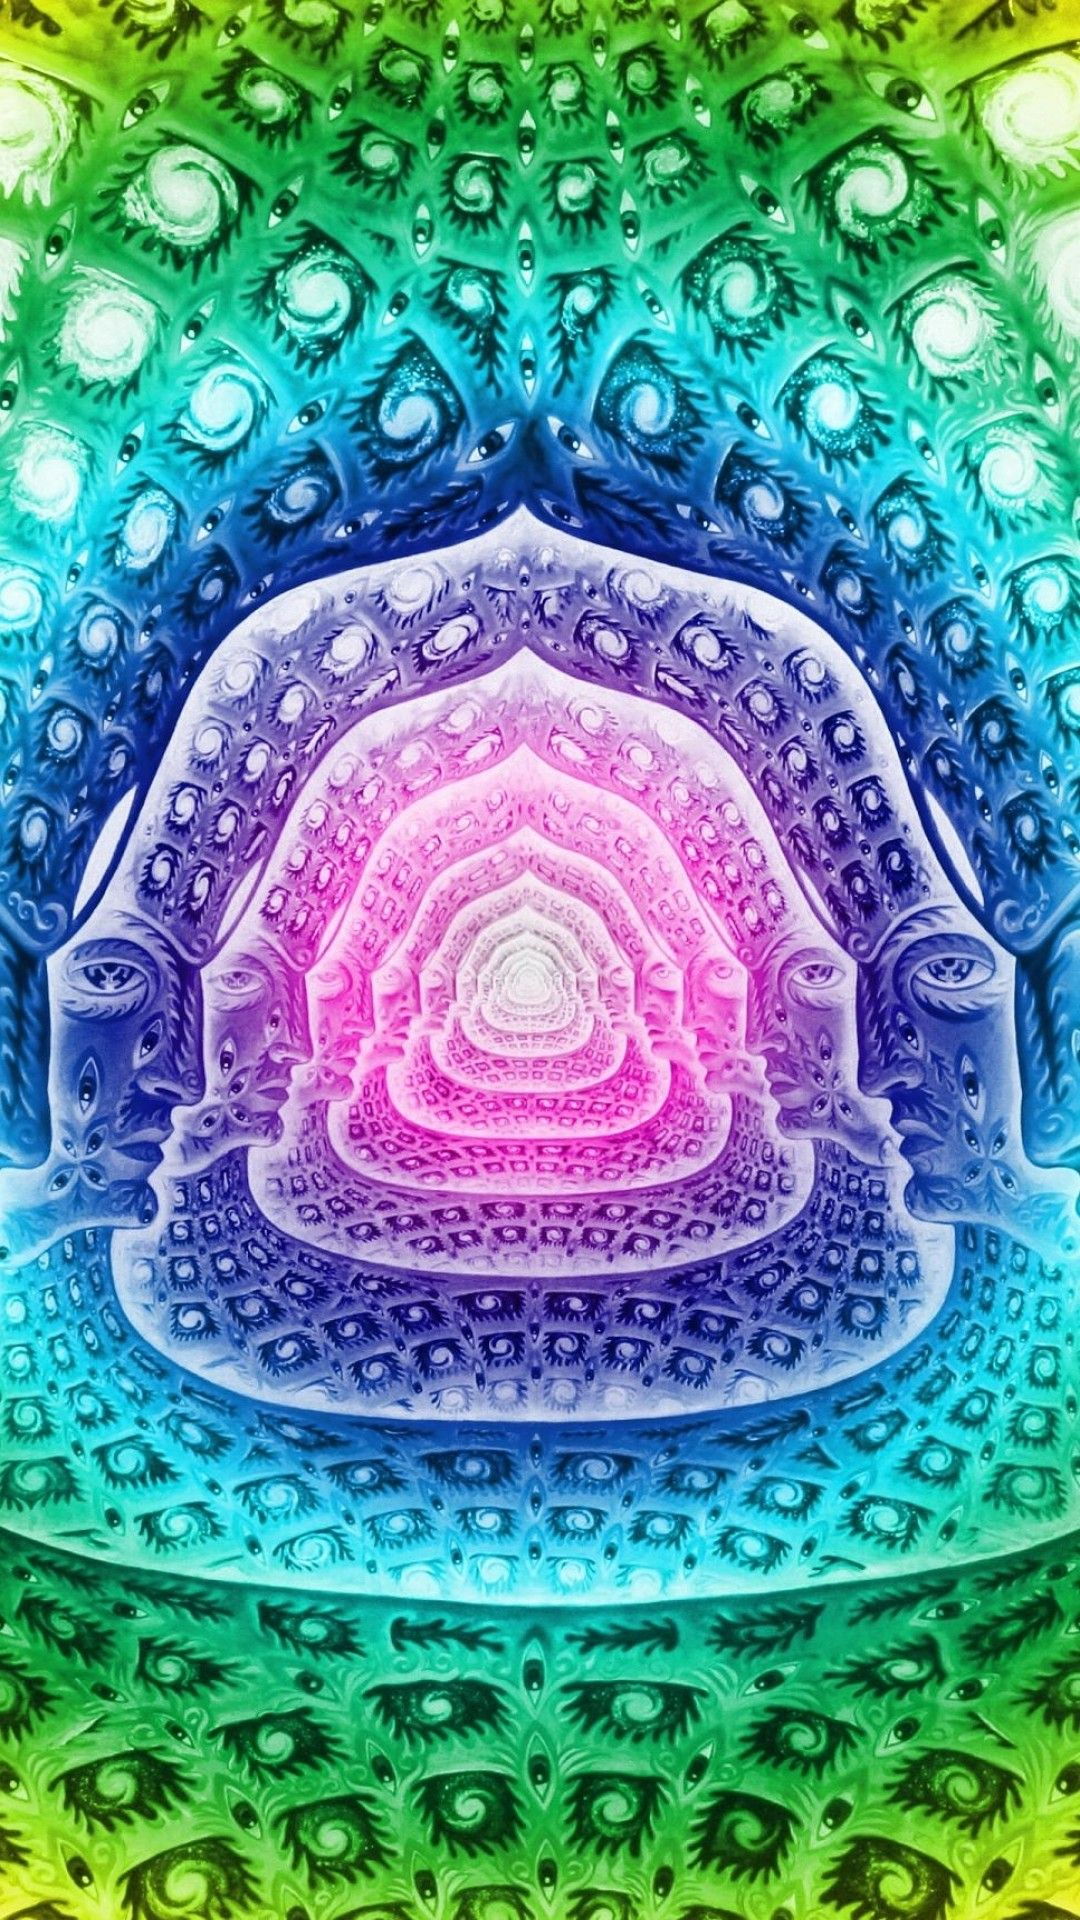 1080x1920 Tool Band Wallpaper HD (54+ images) | Trippy wallpaper, Band wallpapers, Psychedelic artwork